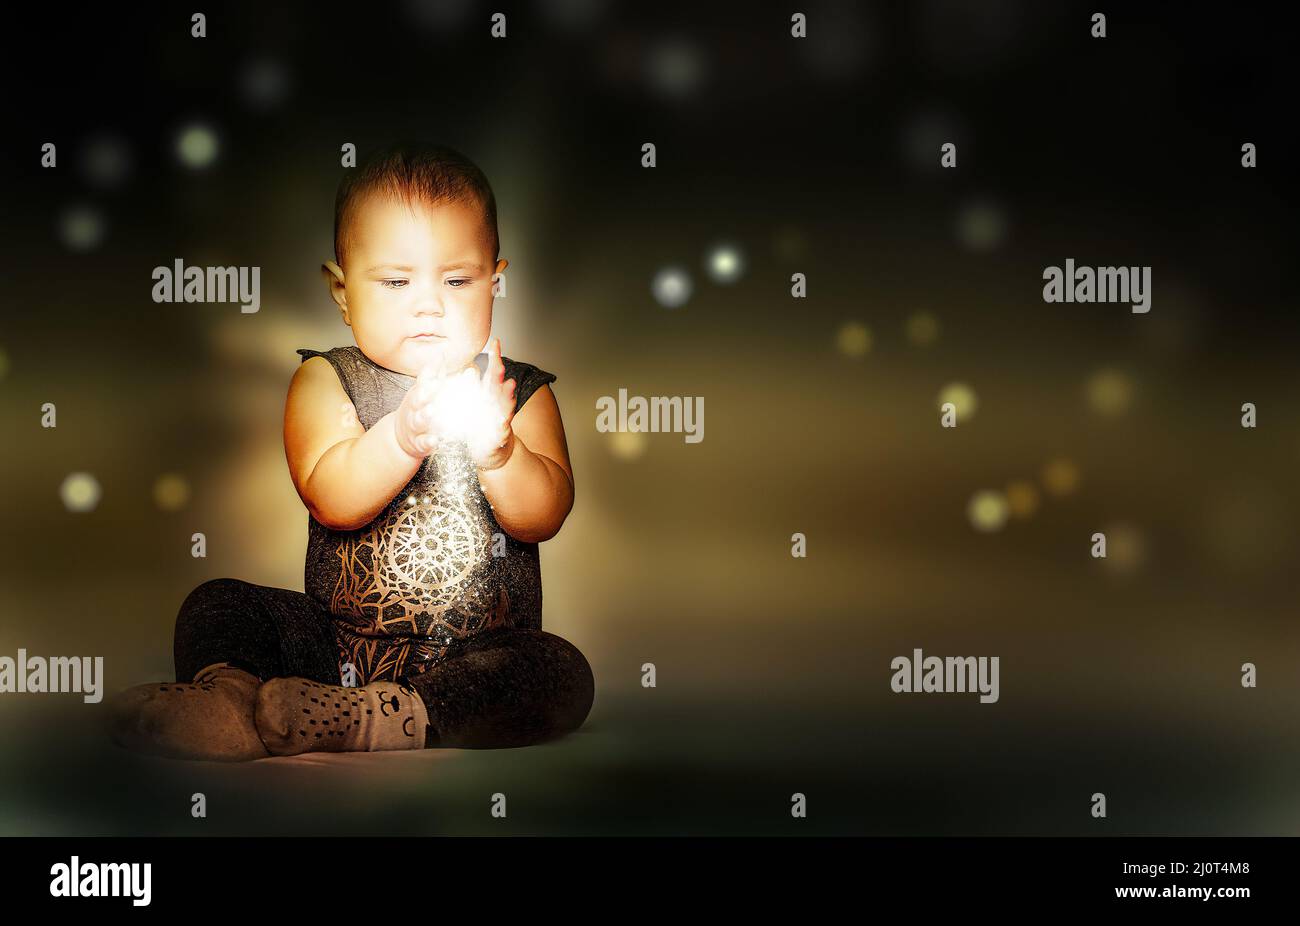 Shining Light in Hands of Little Cute Baby Stock Photo